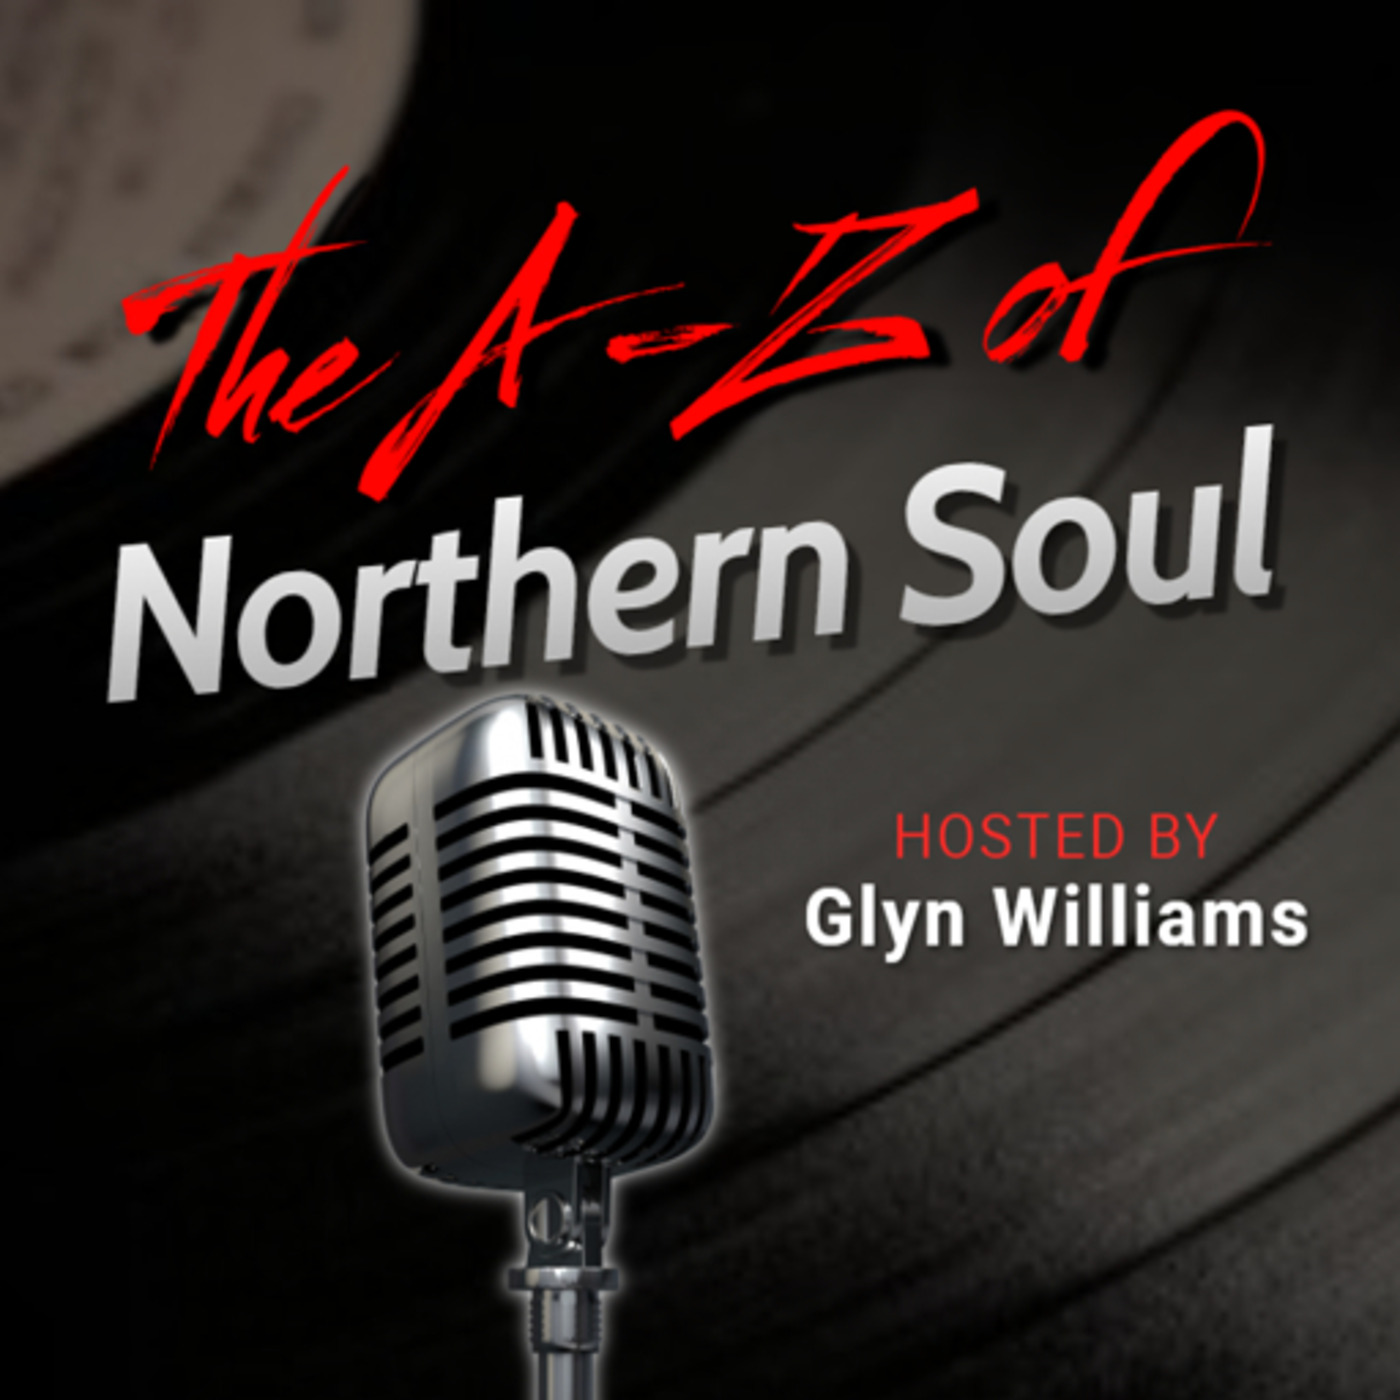 The A-Z of Northern Soul E074